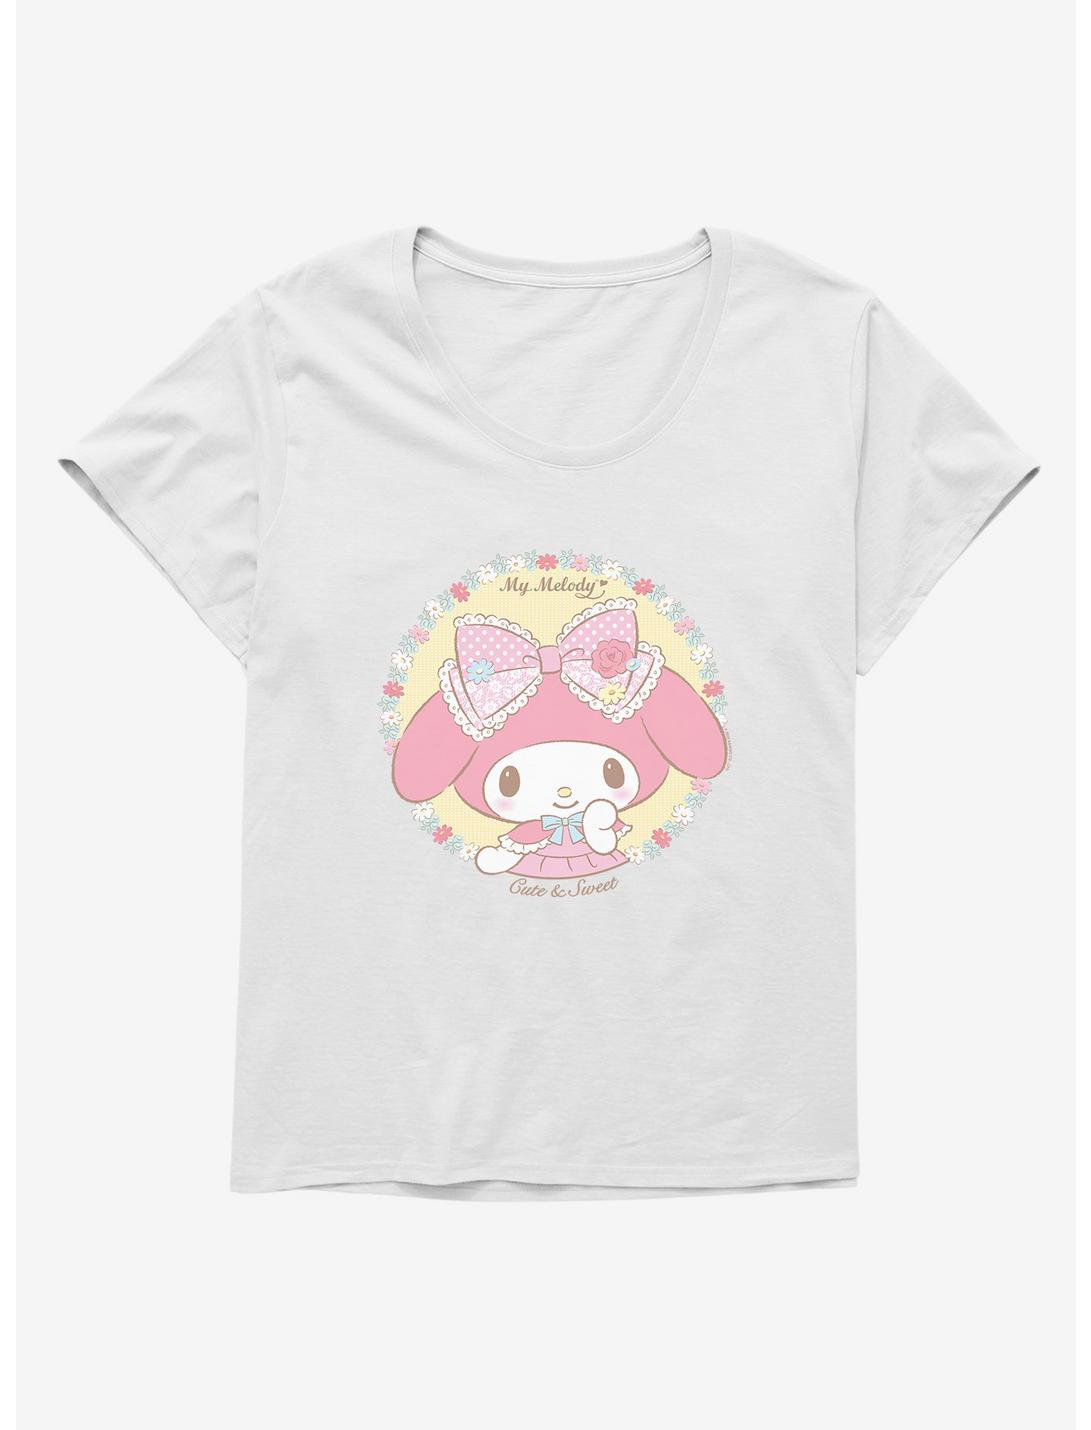 My Melody Cute & Sweet Womens T-Shirt Plus Size, WHITE, hi-res